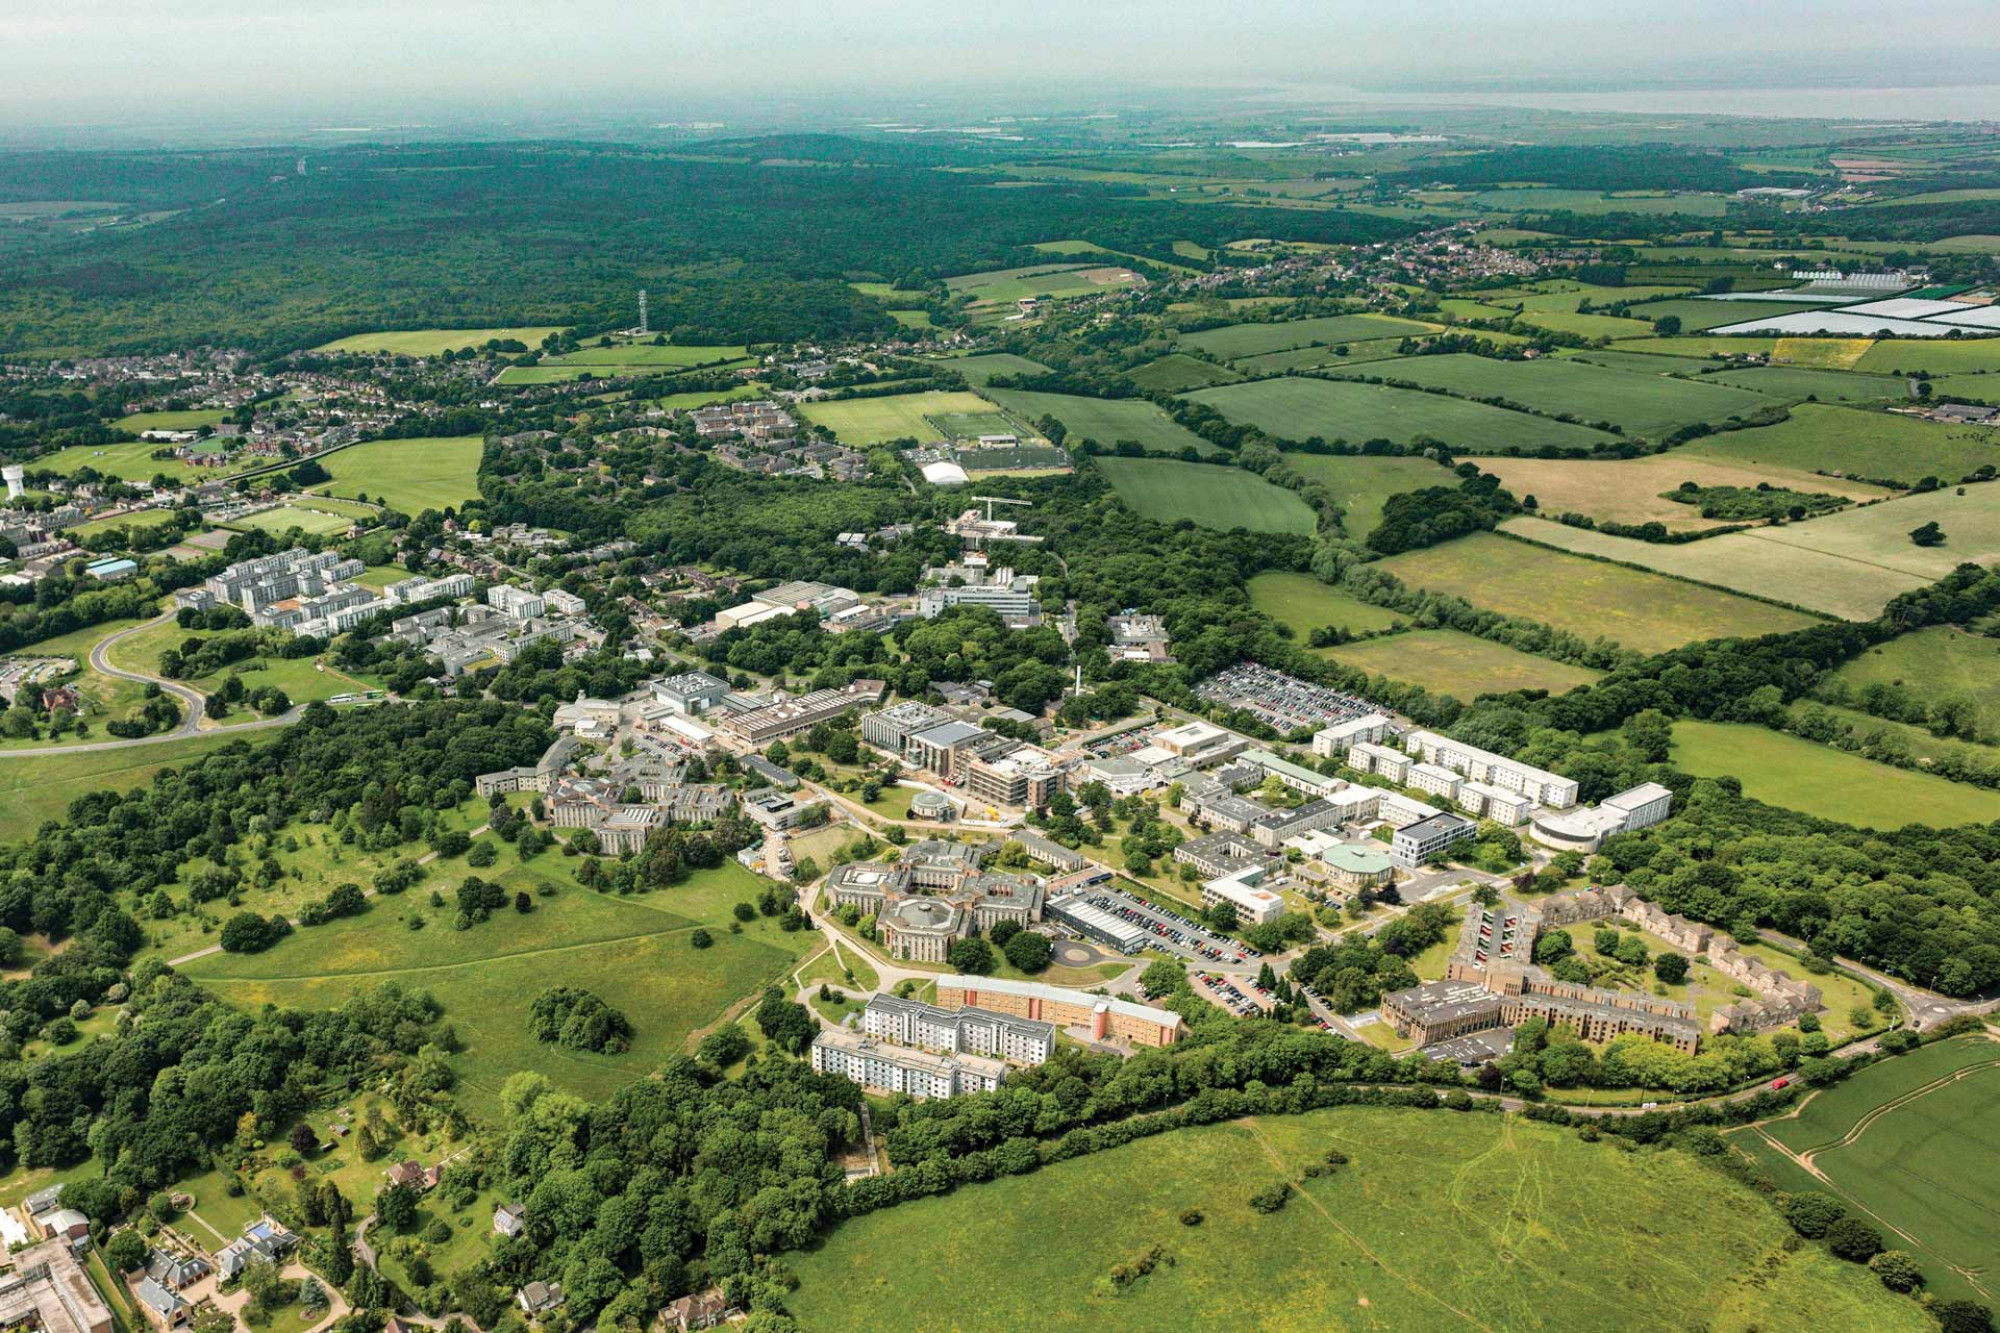 Aerial view of the green Canterbury campus and surrounding area